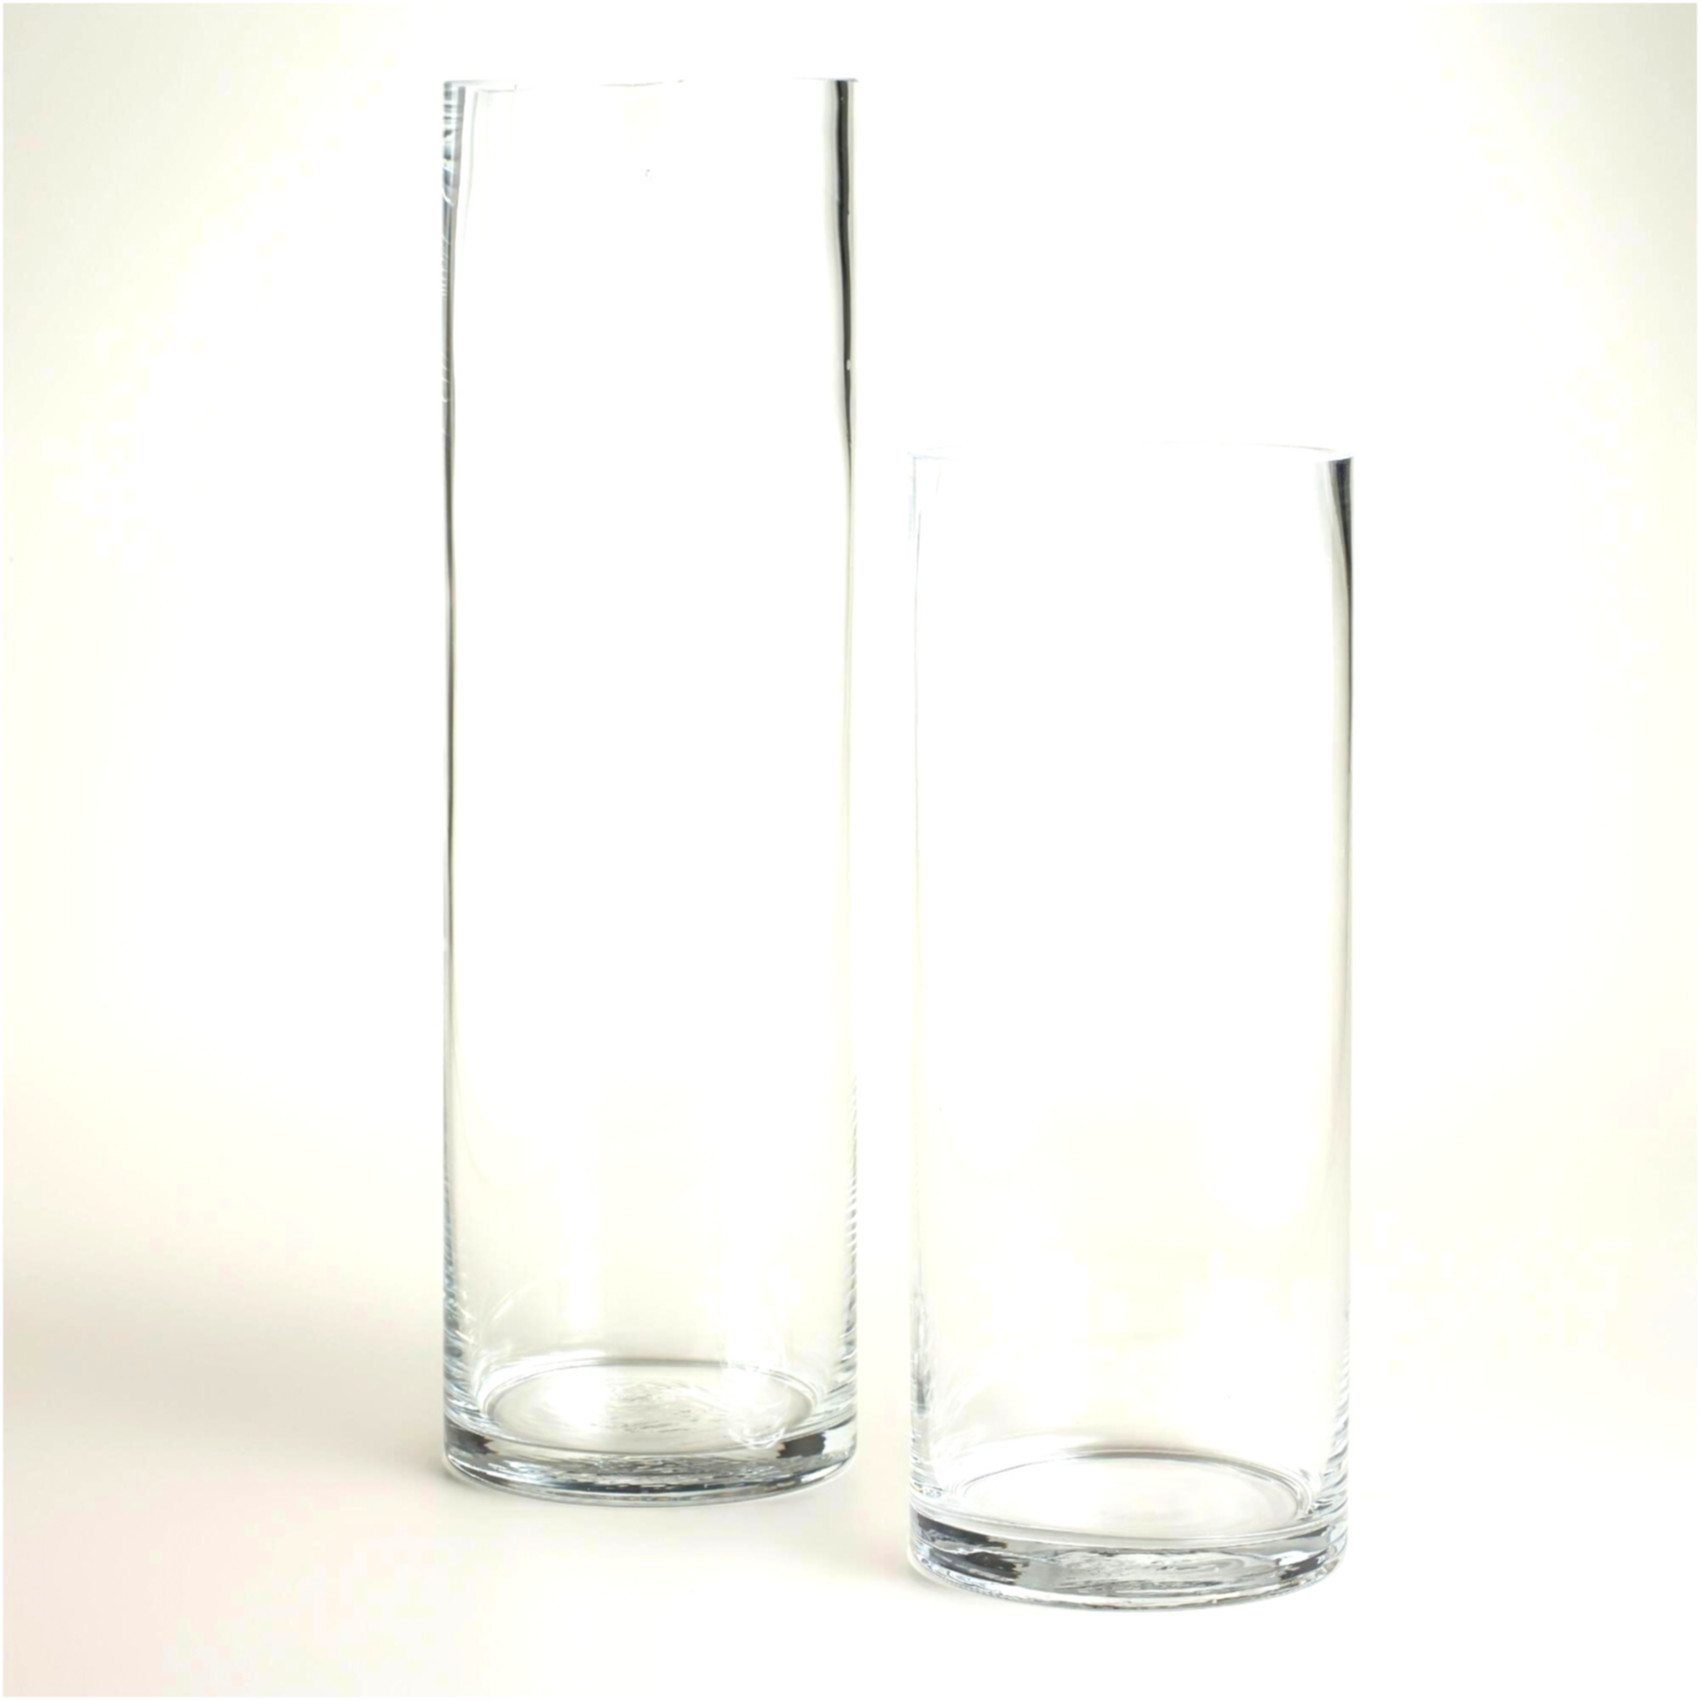 20 attractive Clear Glass Vase Square 2024 free download clear glass vase square of why you should not go to glass vases wholesale glass vases with regard to crystal glass vases wholesale inspirational 30 elegant vases with